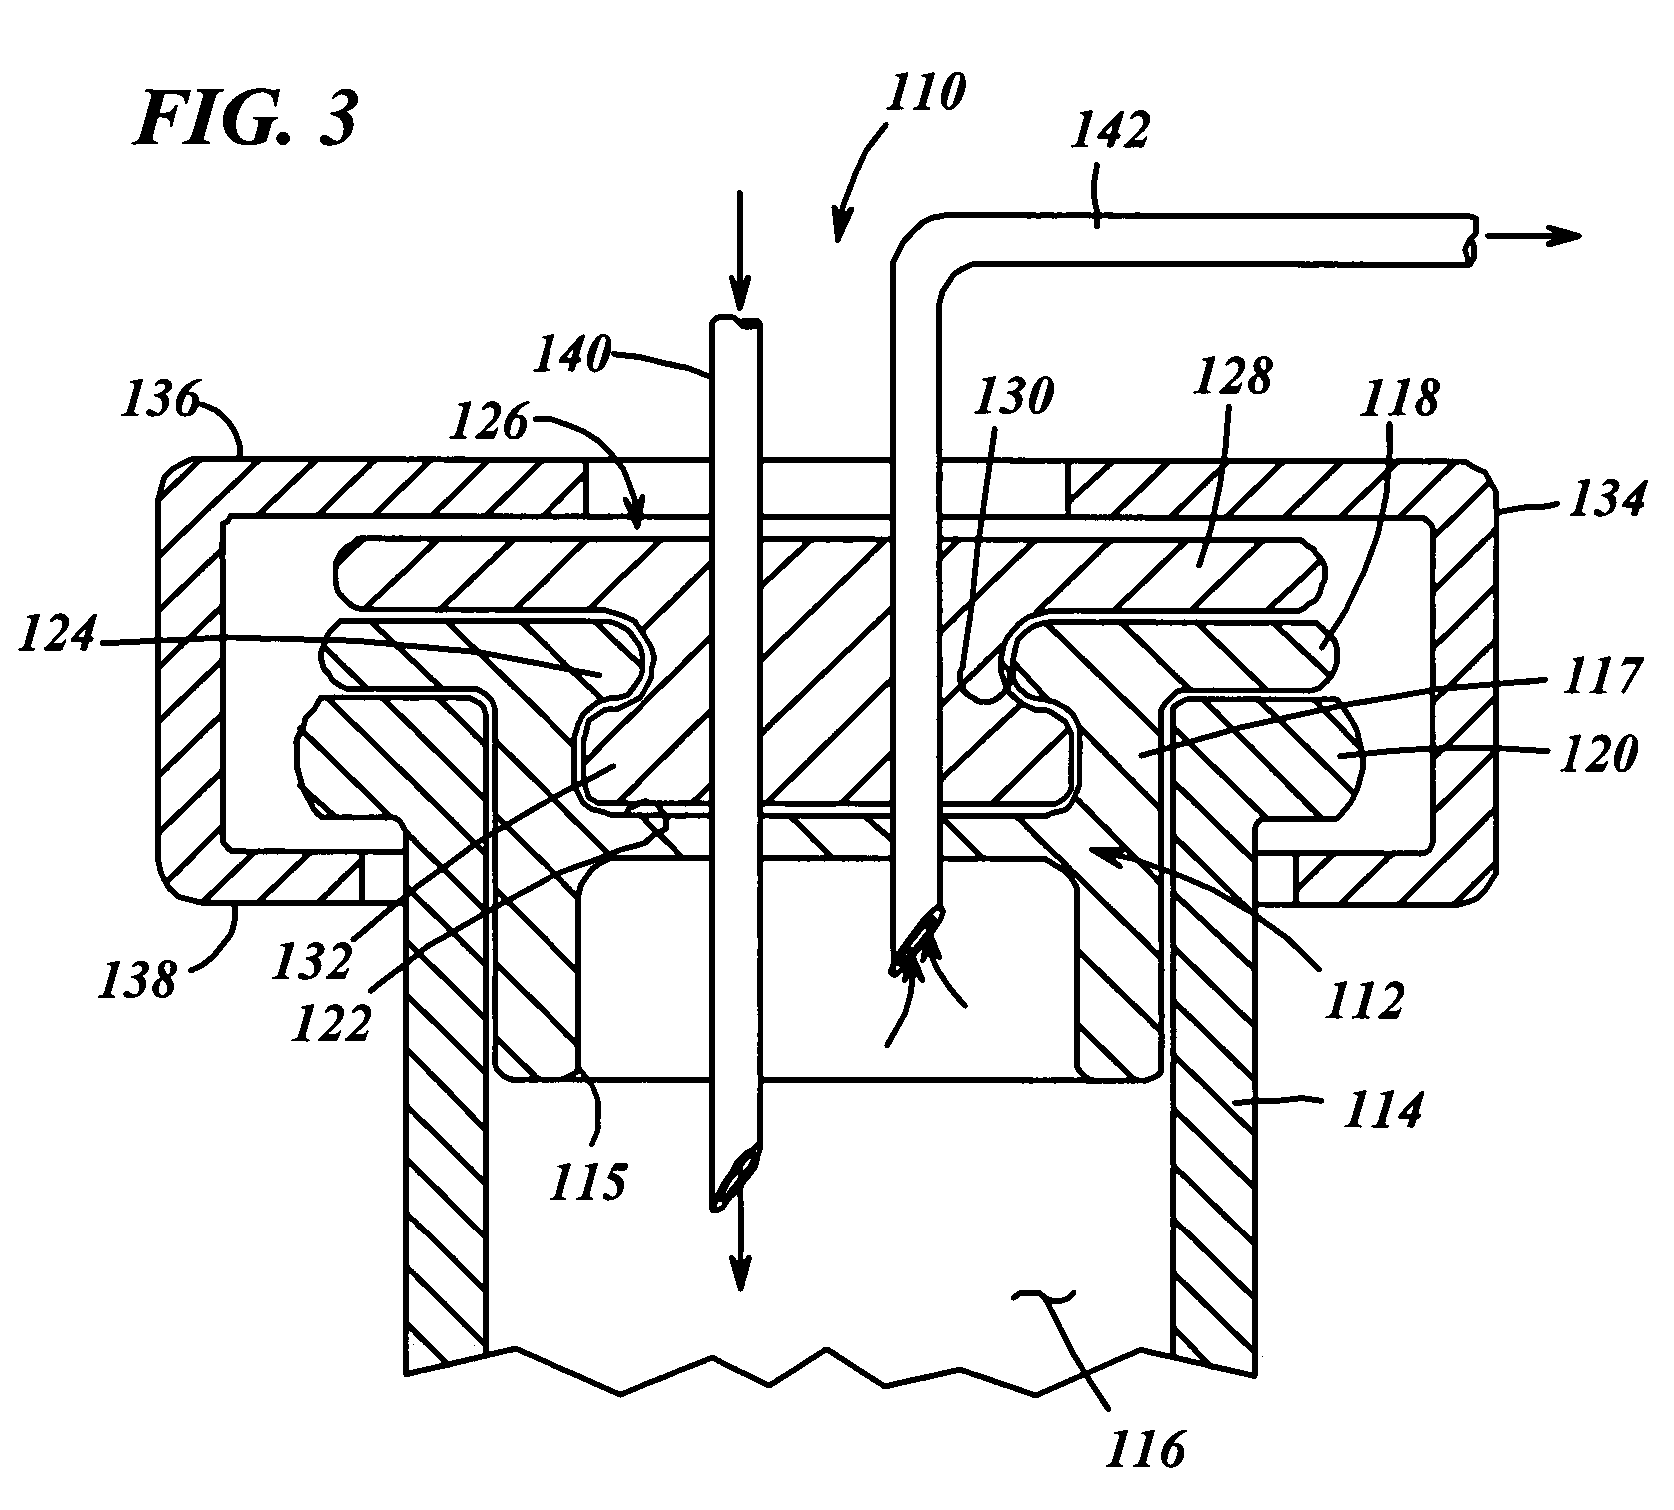 Medicament vial having a heat-sealable cap, and apparatus and method for filling the vial